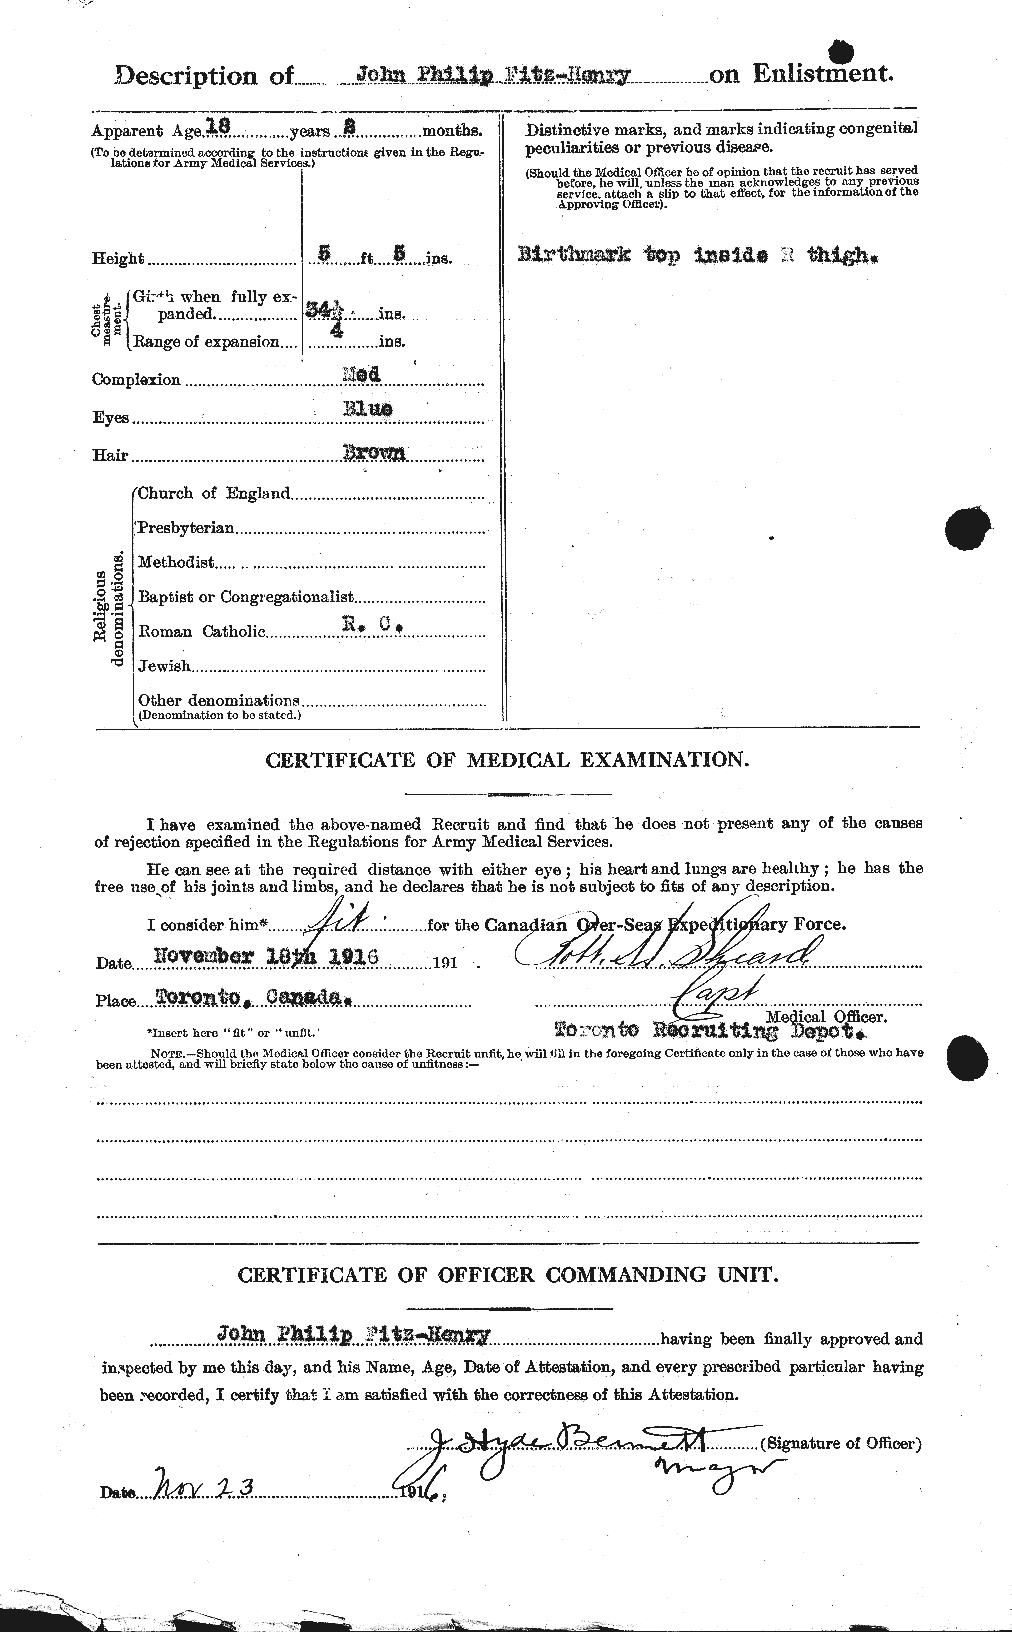 Personnel Records of the First World War - CEF 326723b